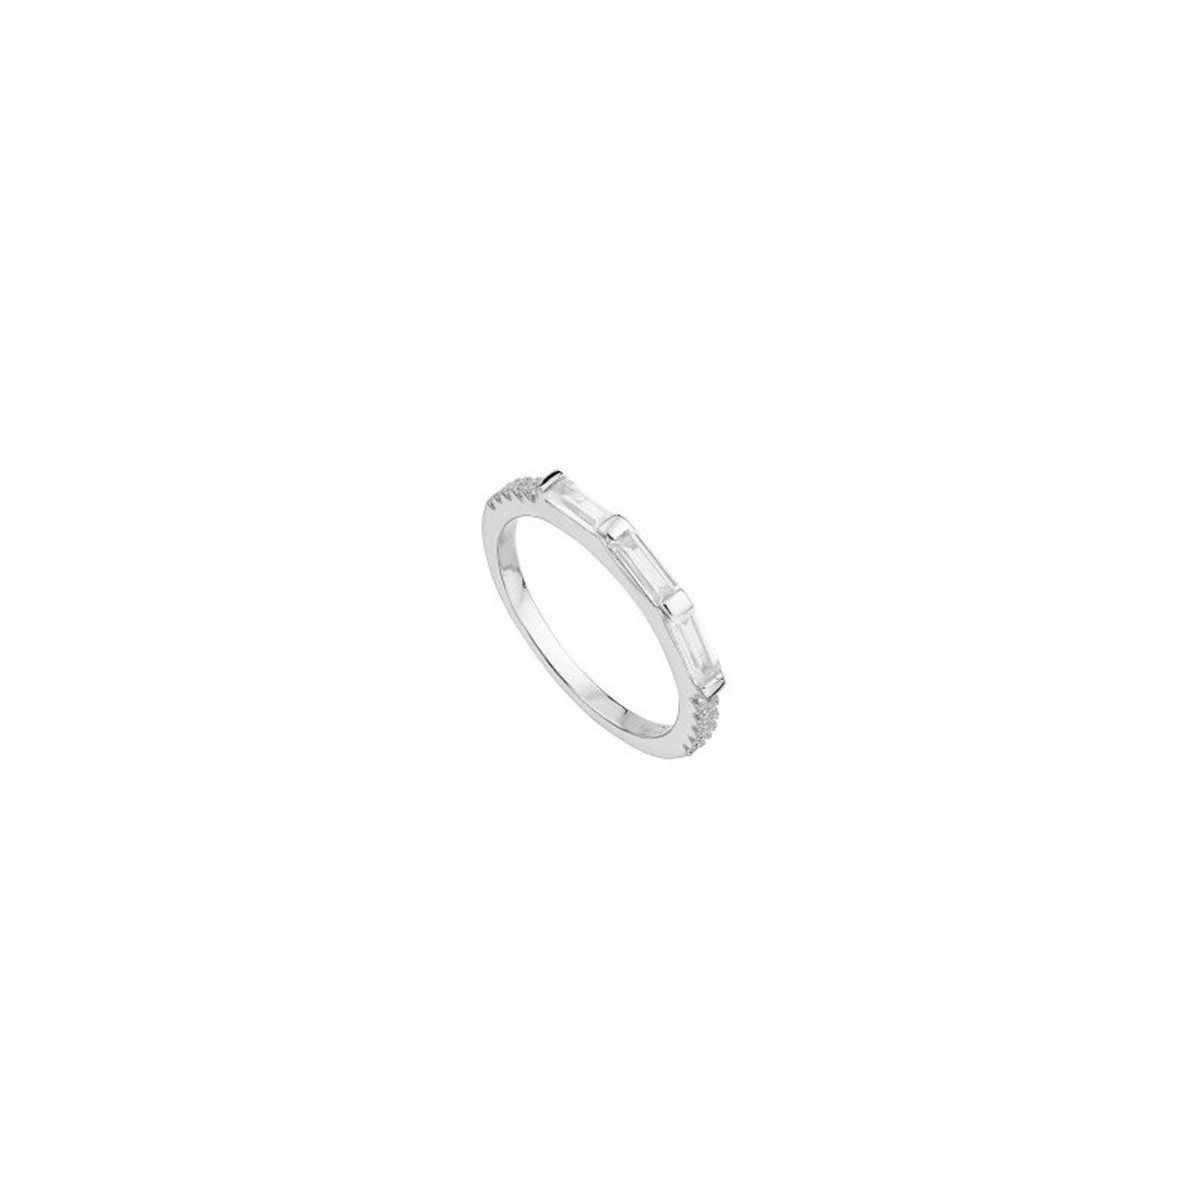 ANILLO ITEMPORALITY BASIC BAGUETTE - SRN-101-012-12